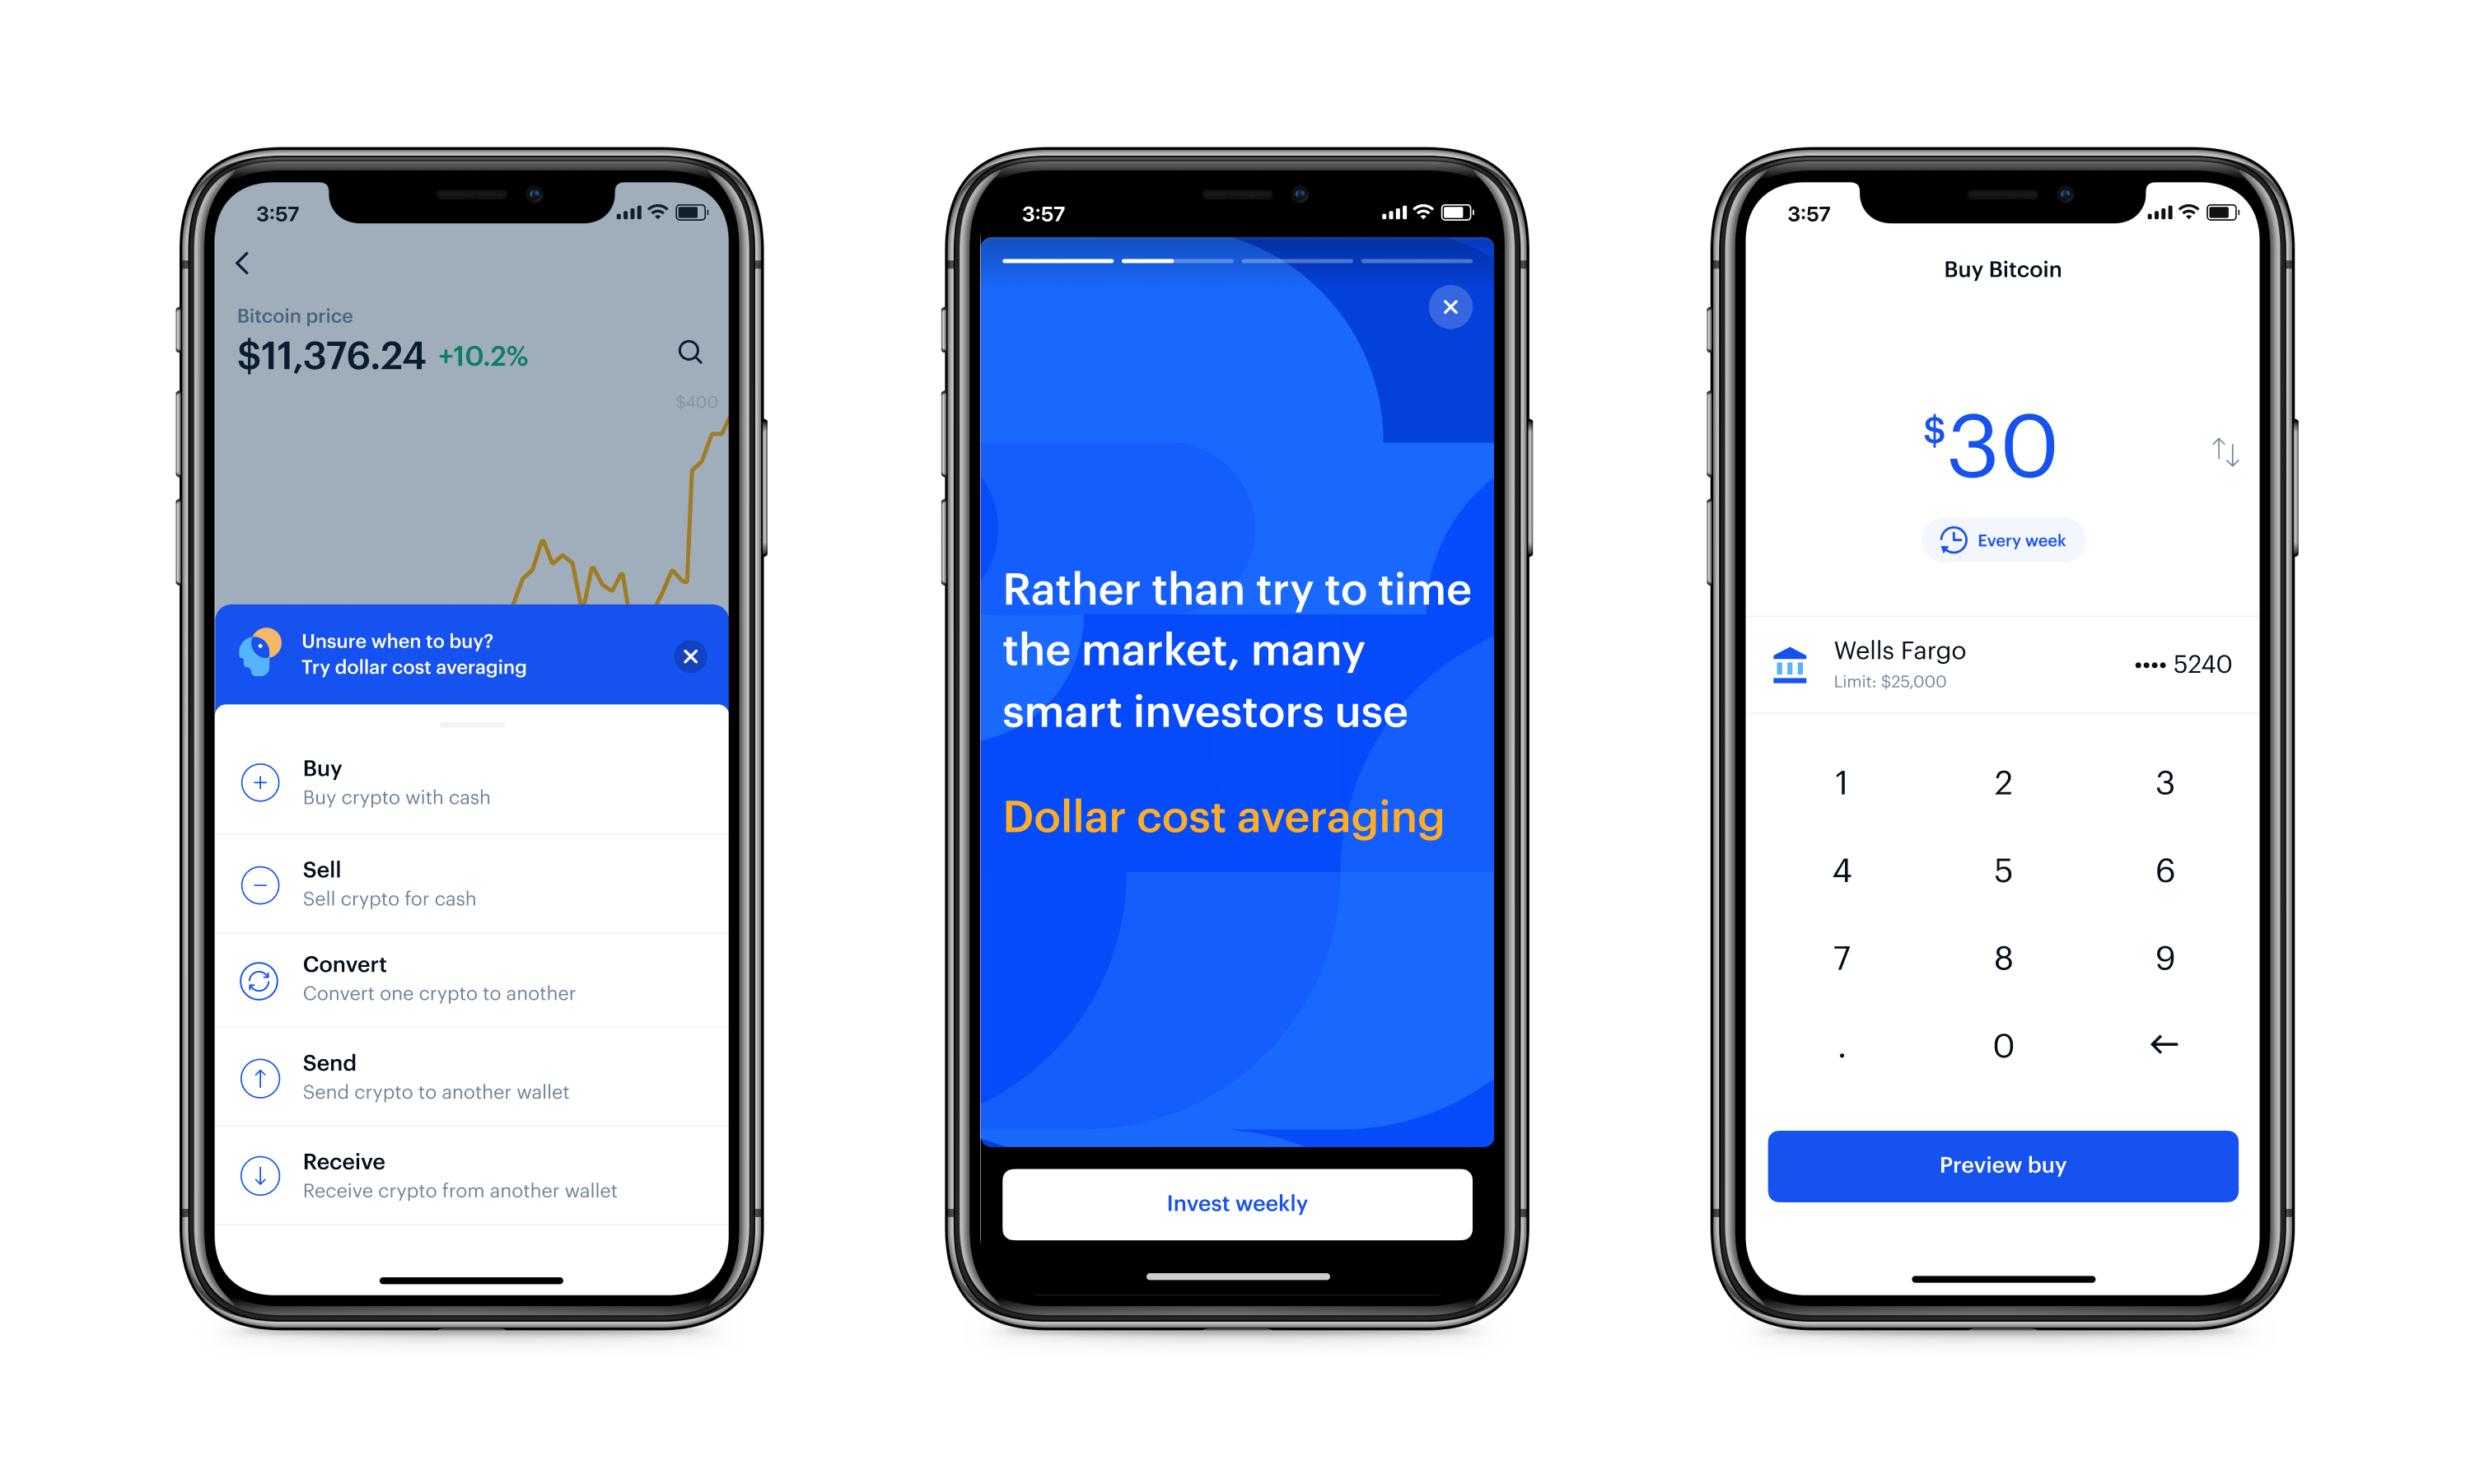 Coinbase makes investing easy with dollar cost averaging ...